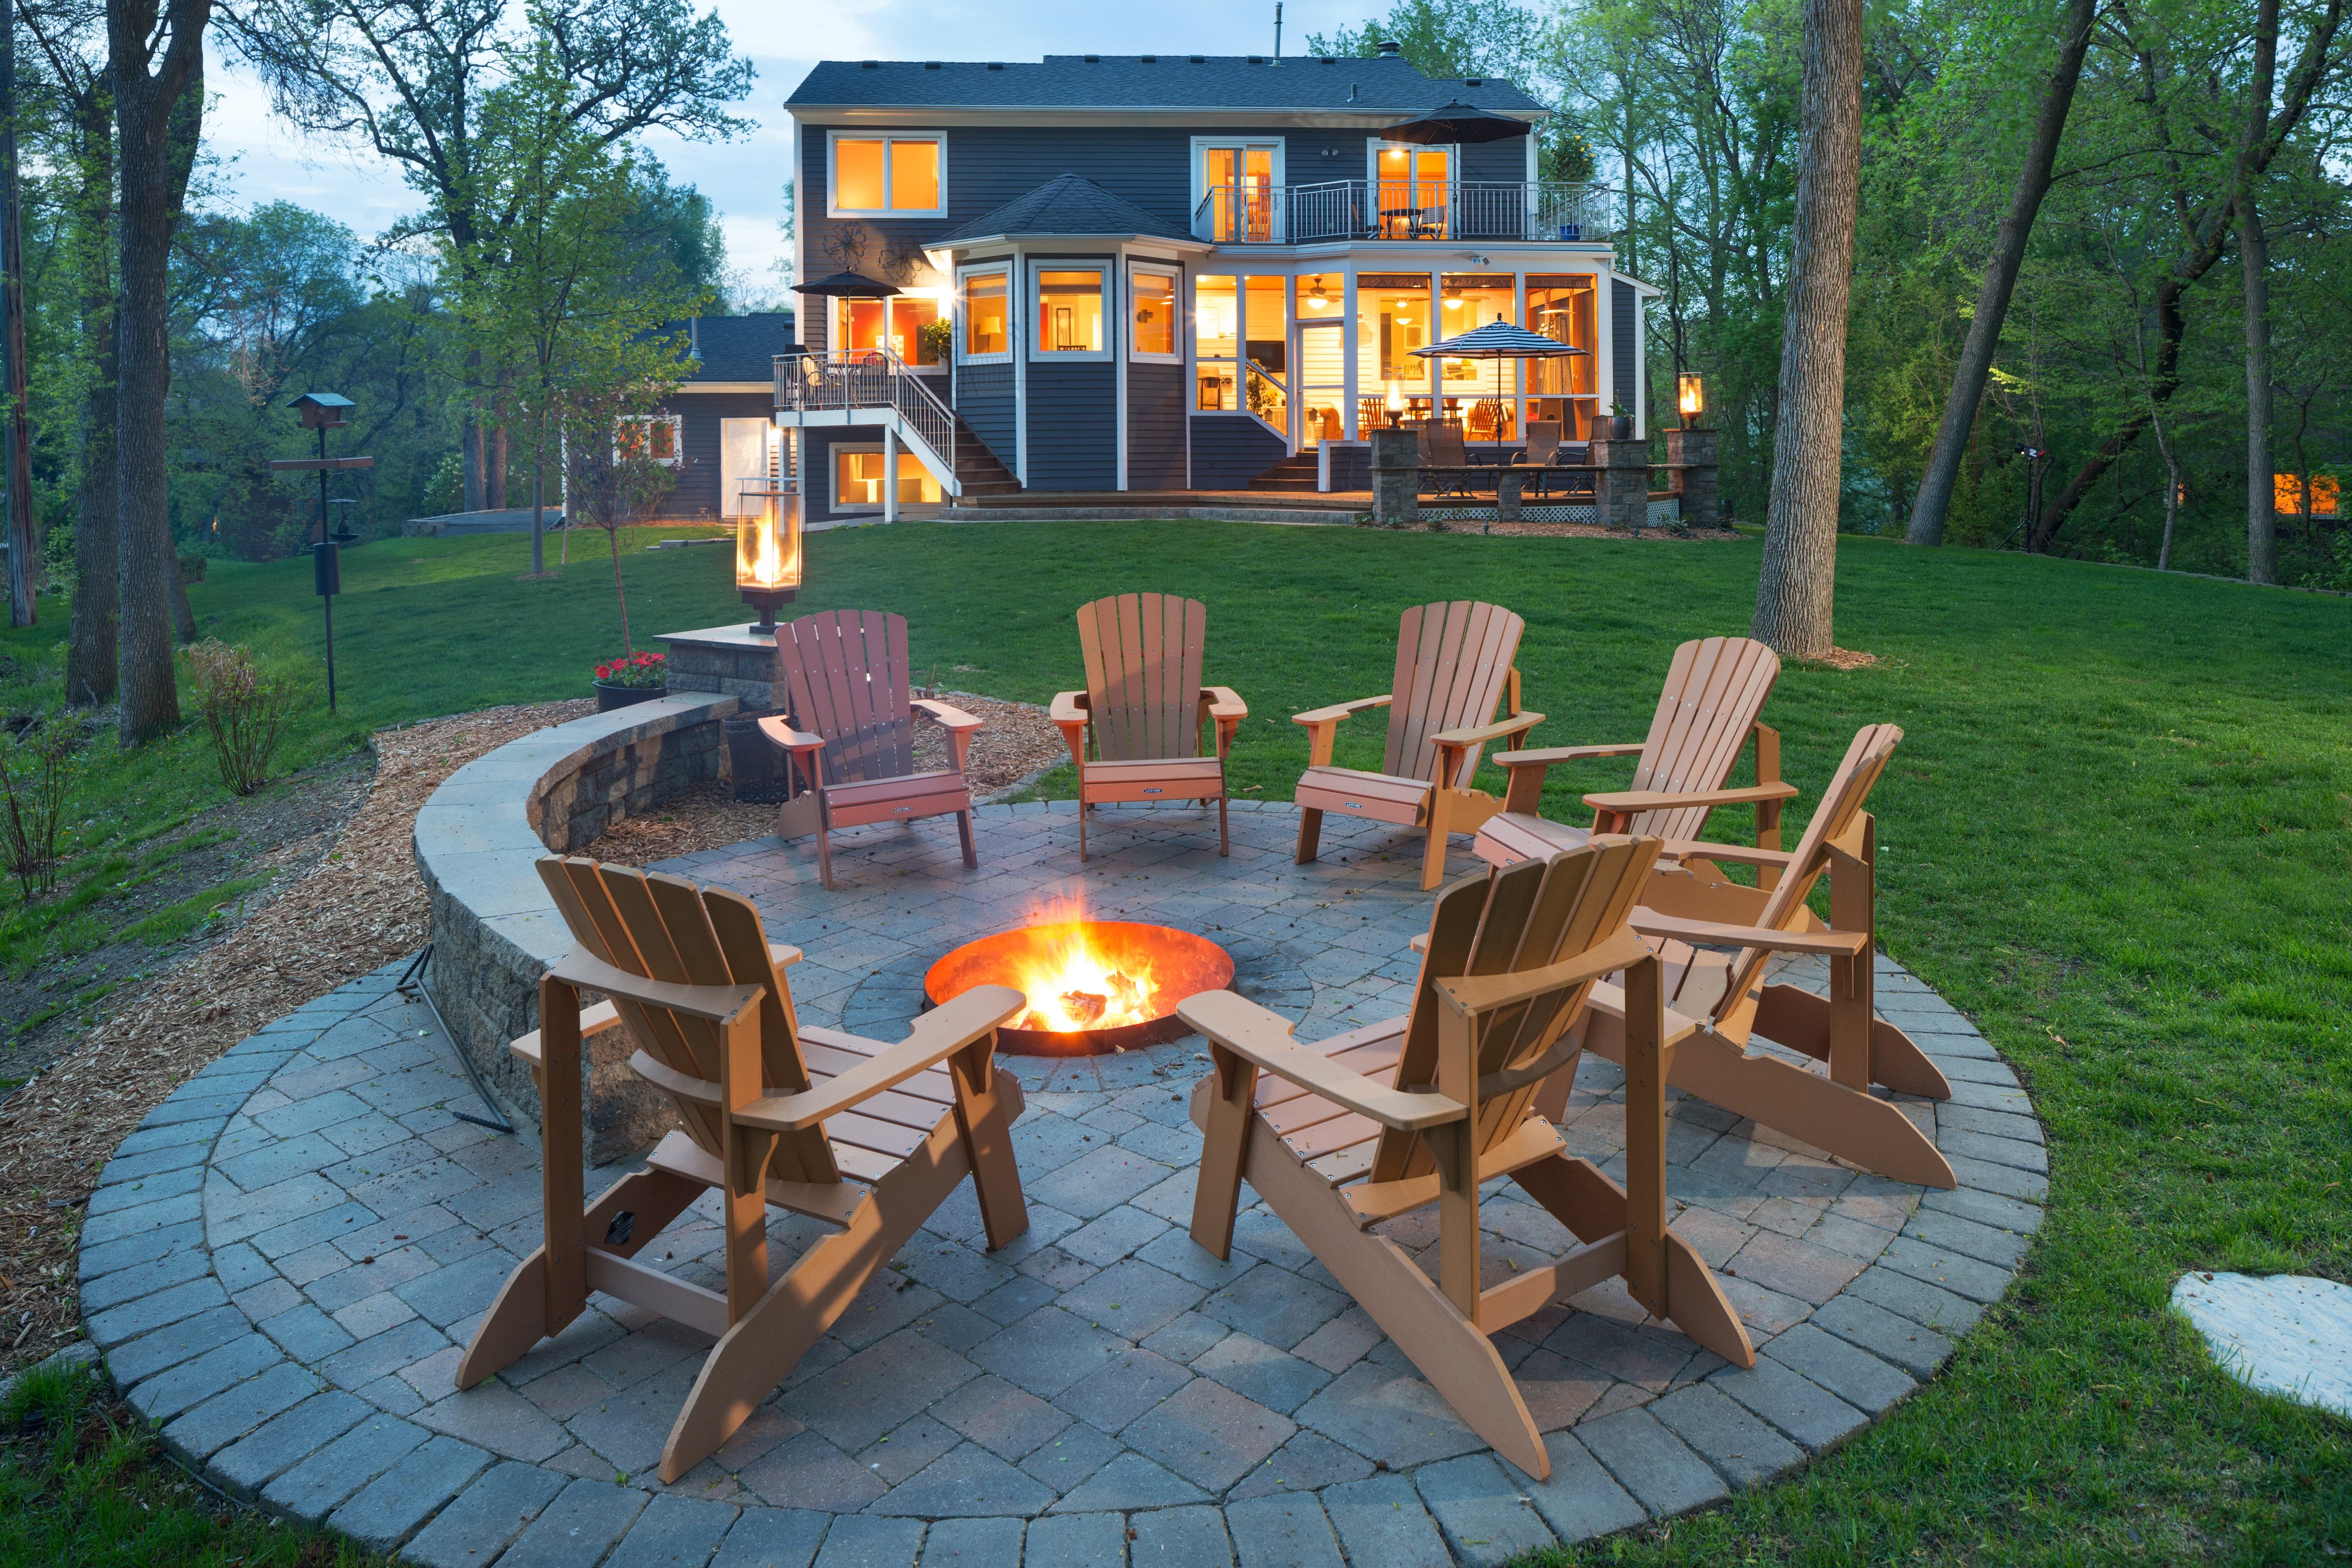 Eden Prairie home with a beautiful  backyard with bonfire fire pit and chairs around it.